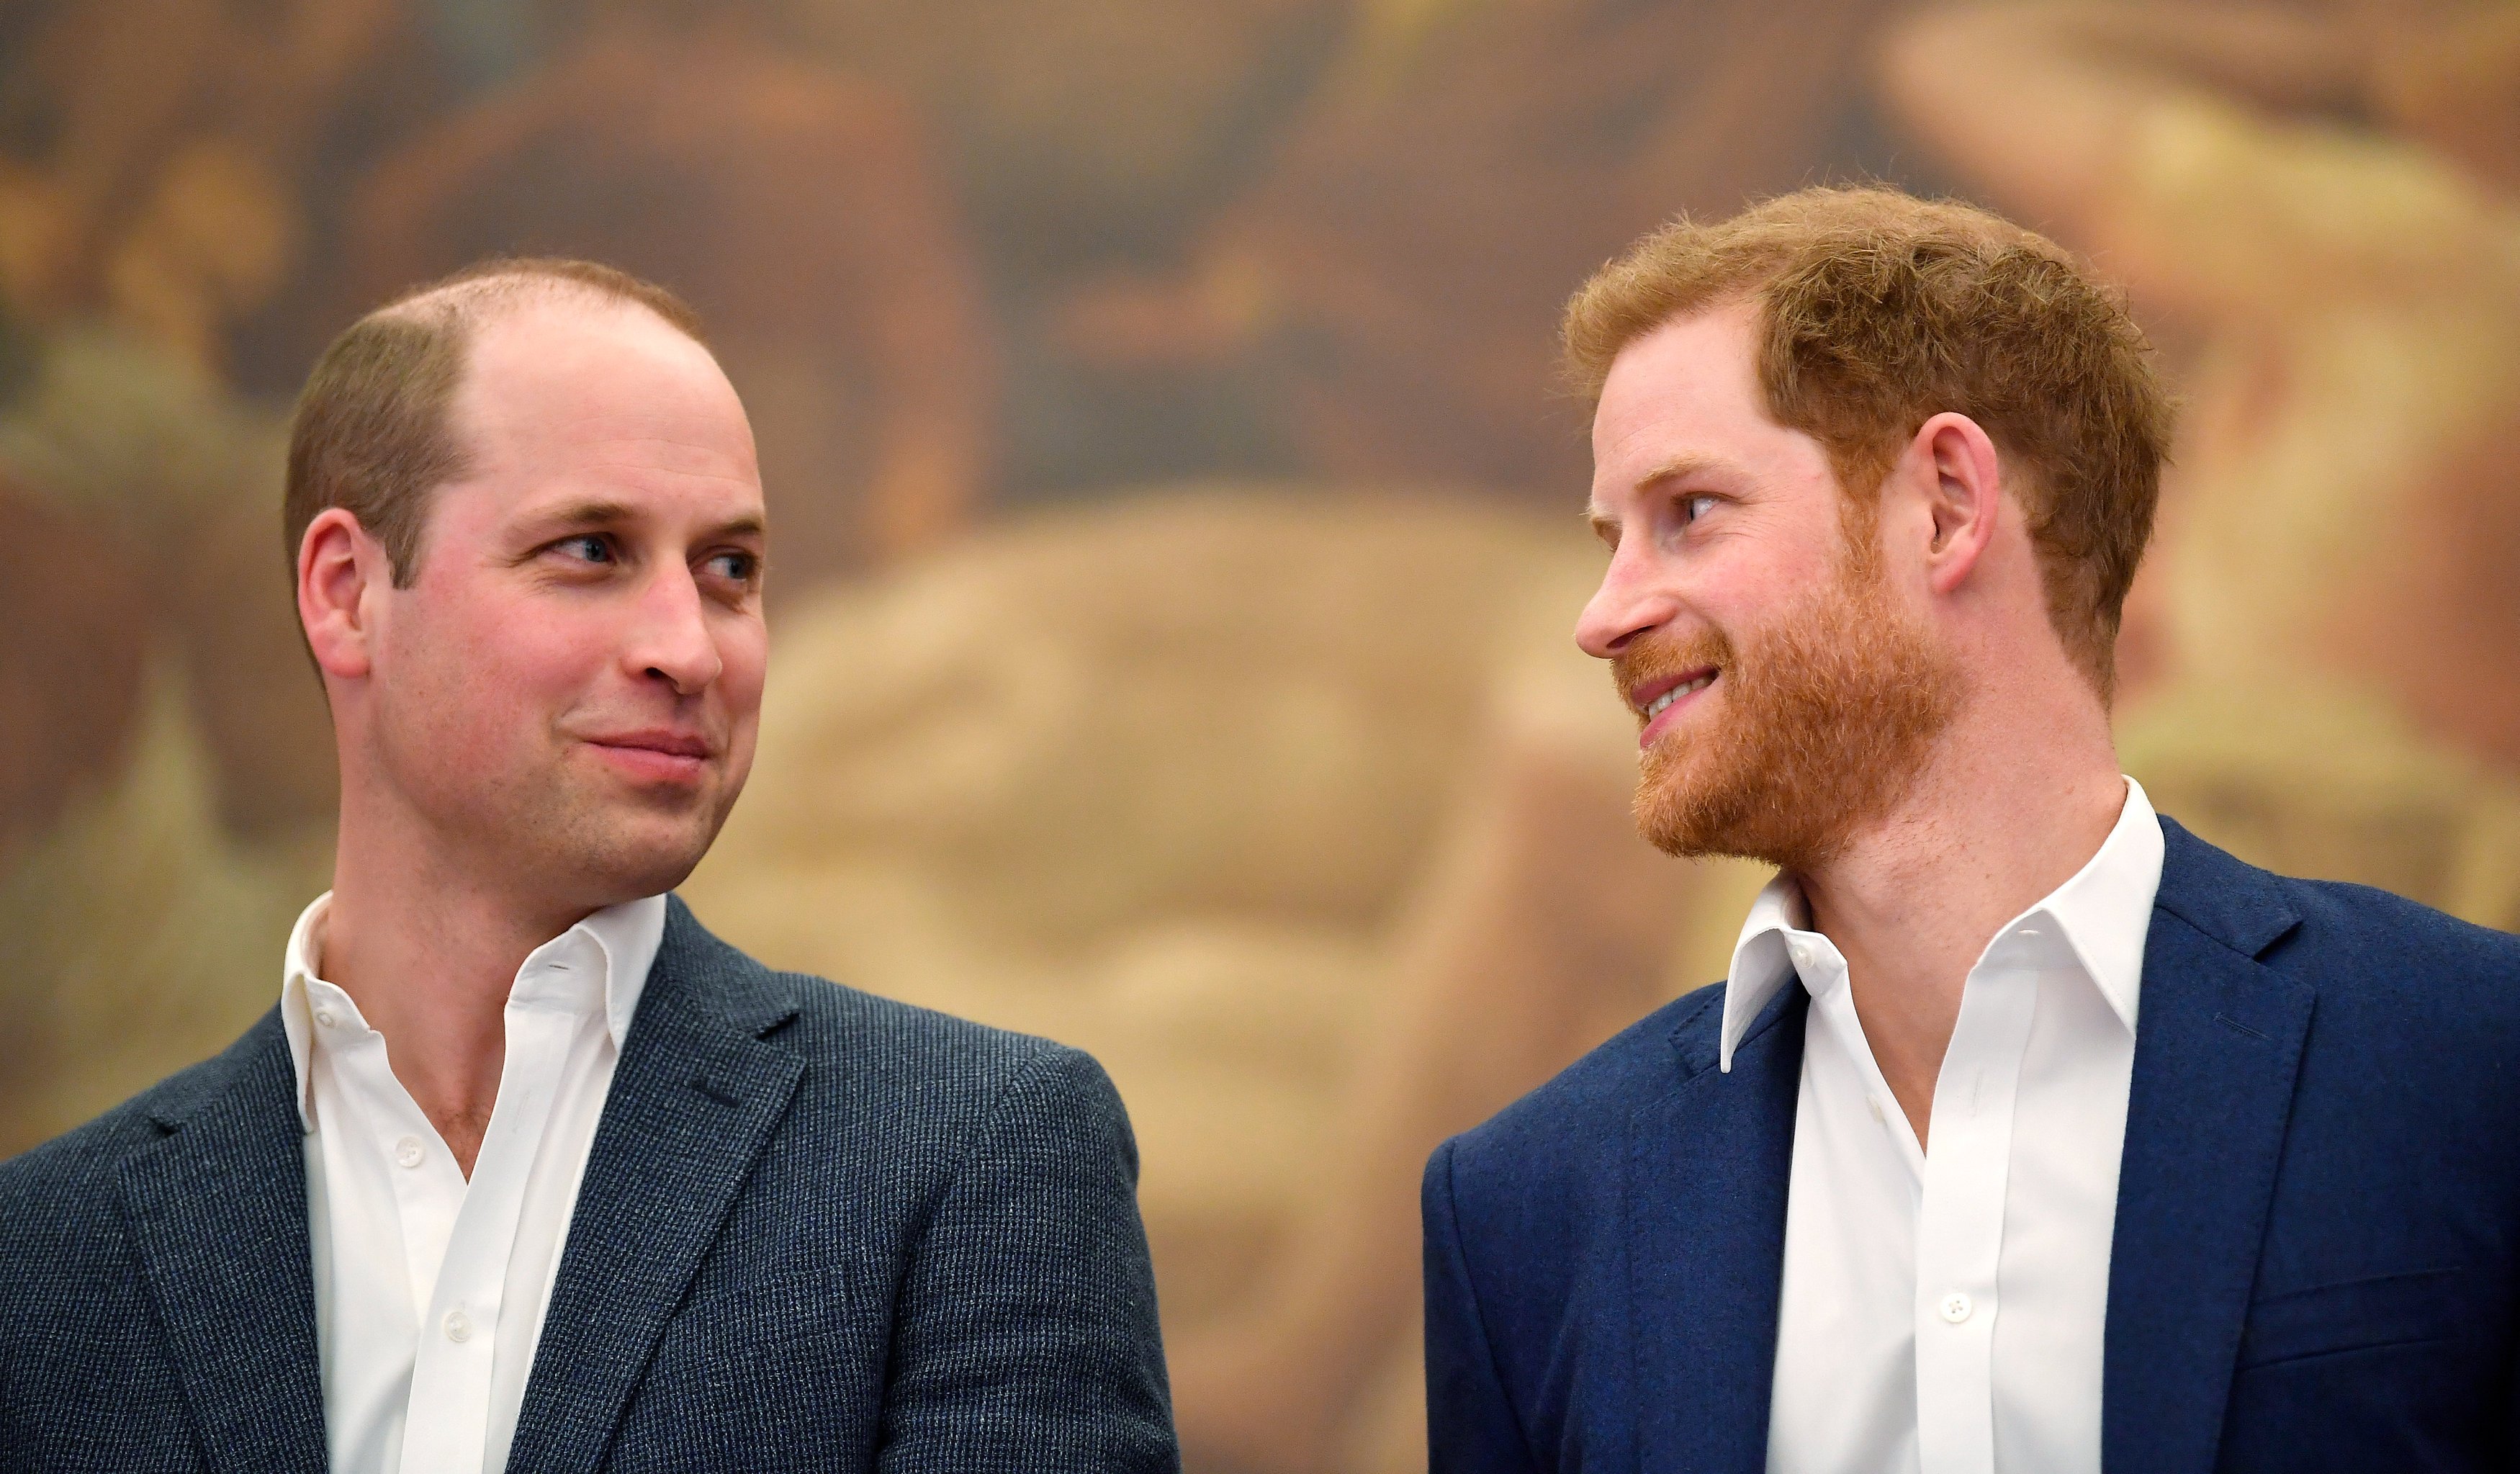 Prince William and Prince Harry at the opening of the Greenhouse Sports Centre on April 26, 2018, in London, United Kingdom | Source: Getty Images